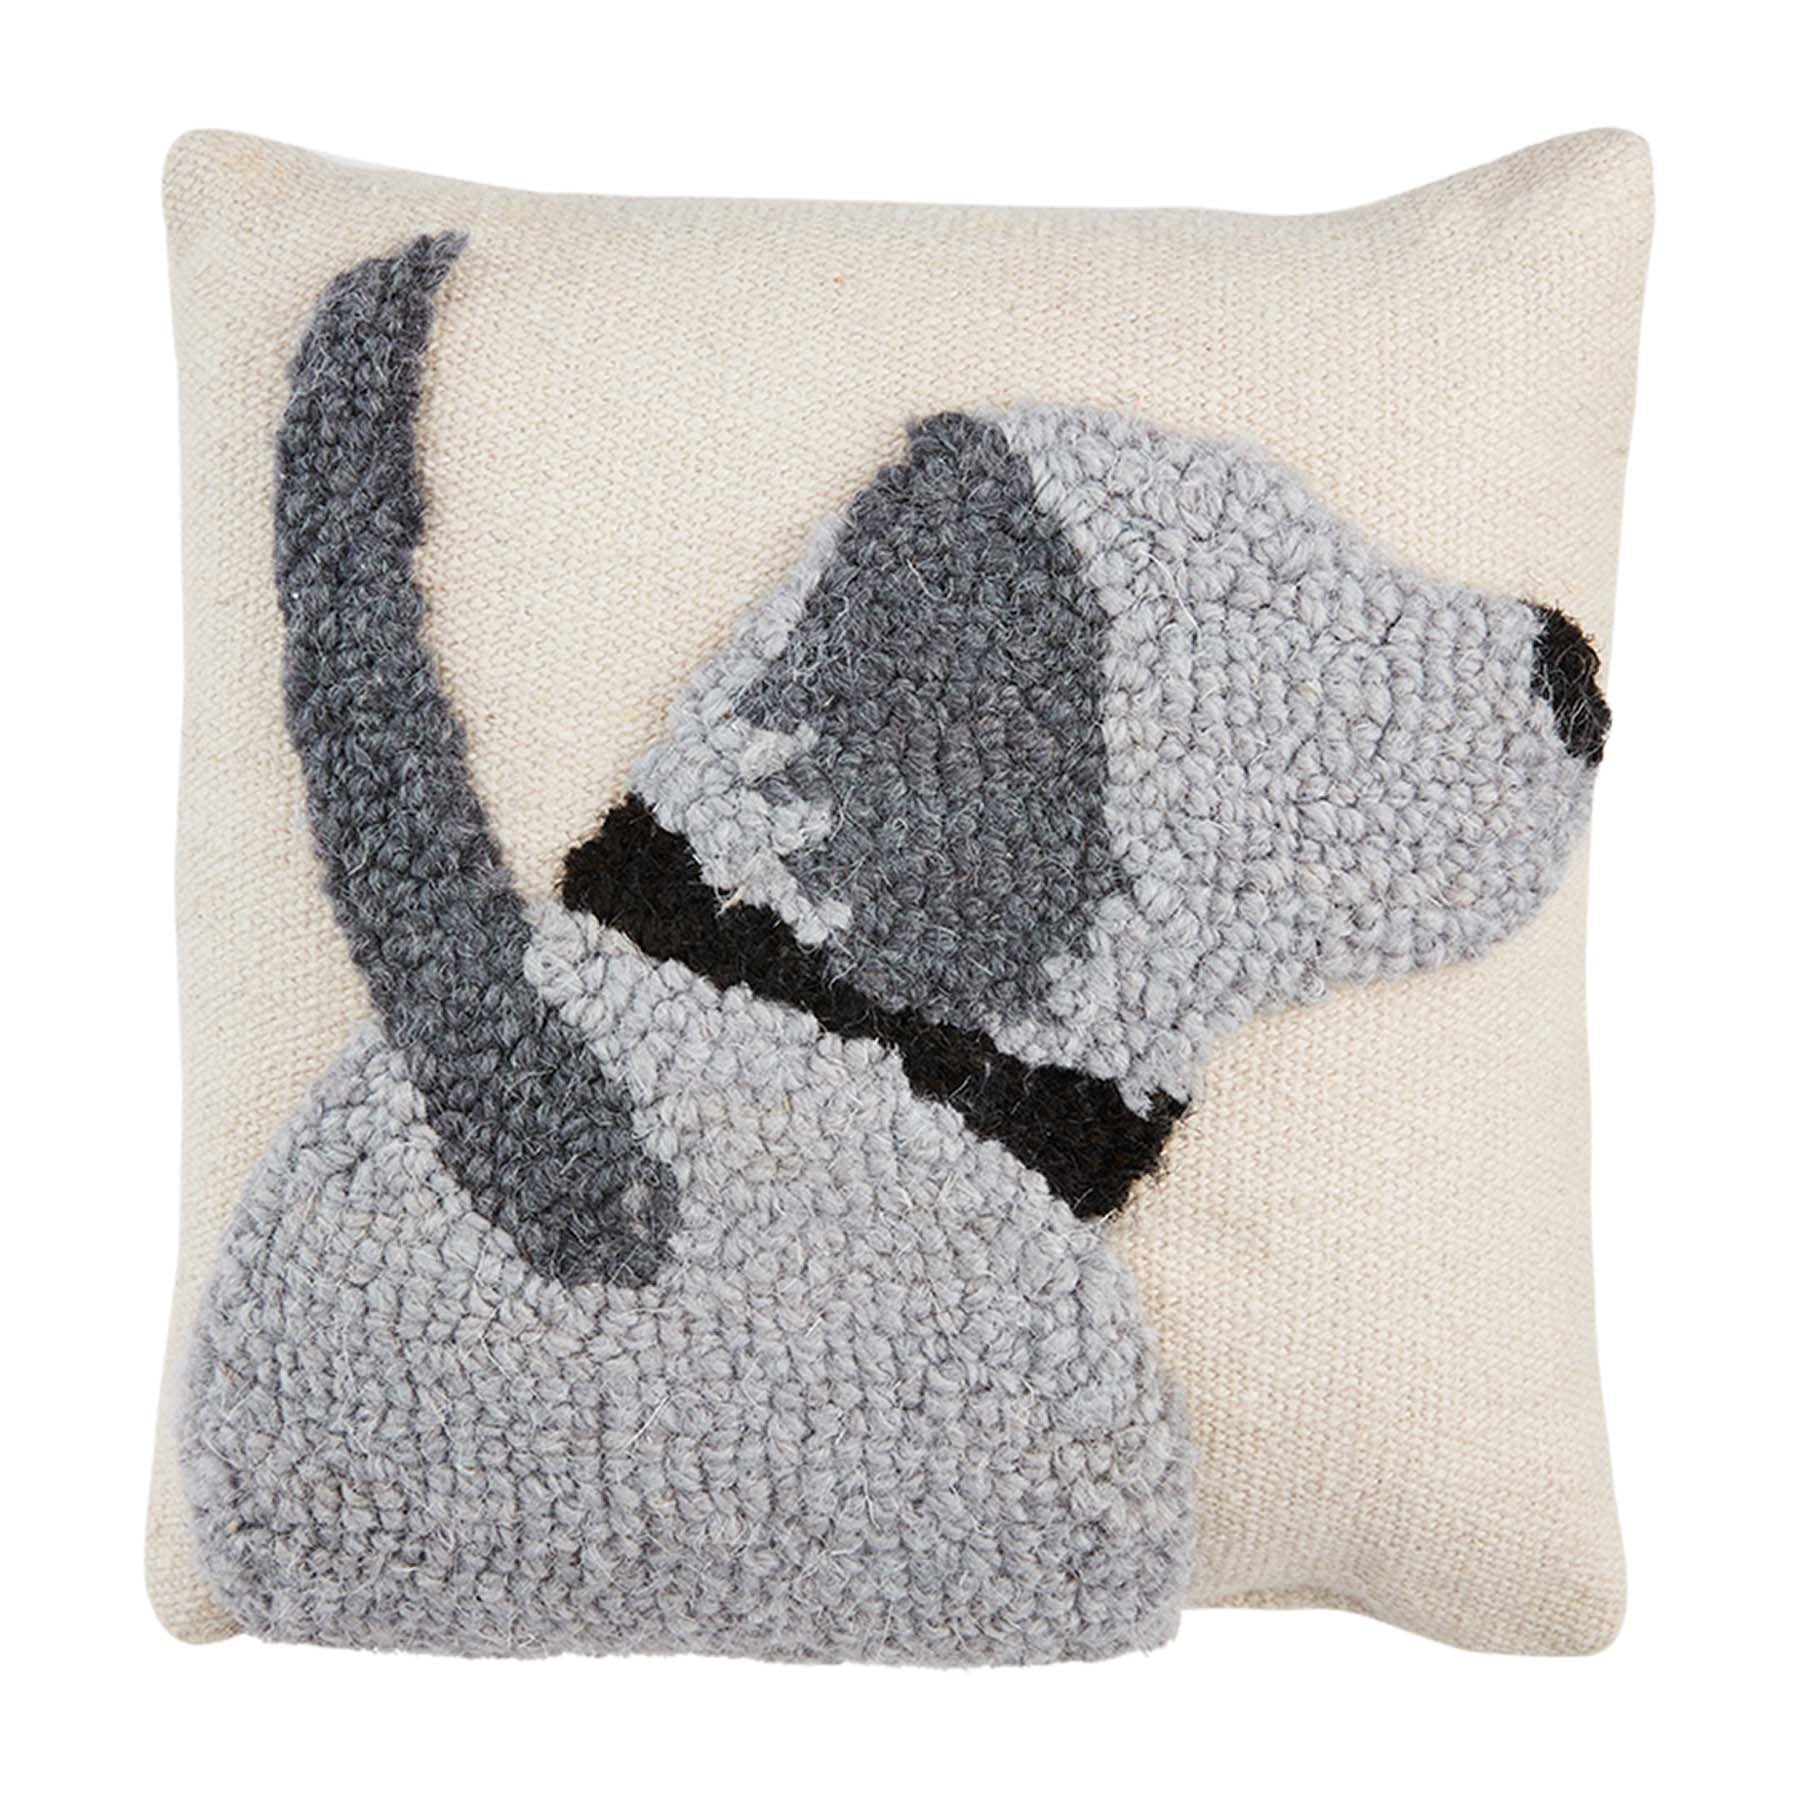 DOG PILLOW - Molly's! A Chic and Unique Boutique 